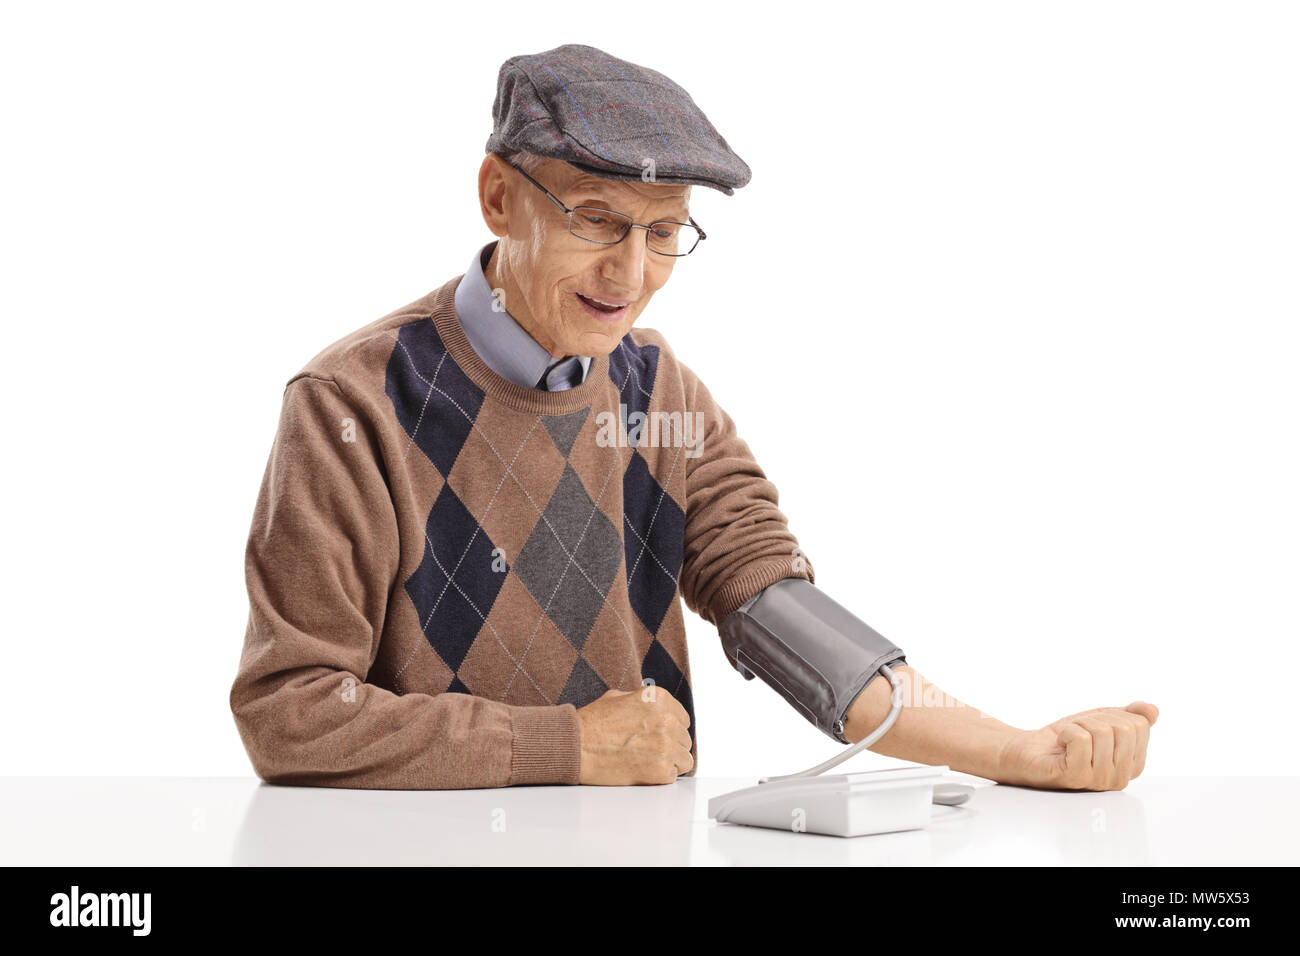 Mature man sitting at a table and measuring his blood pressure isolated on white background Stock Photo